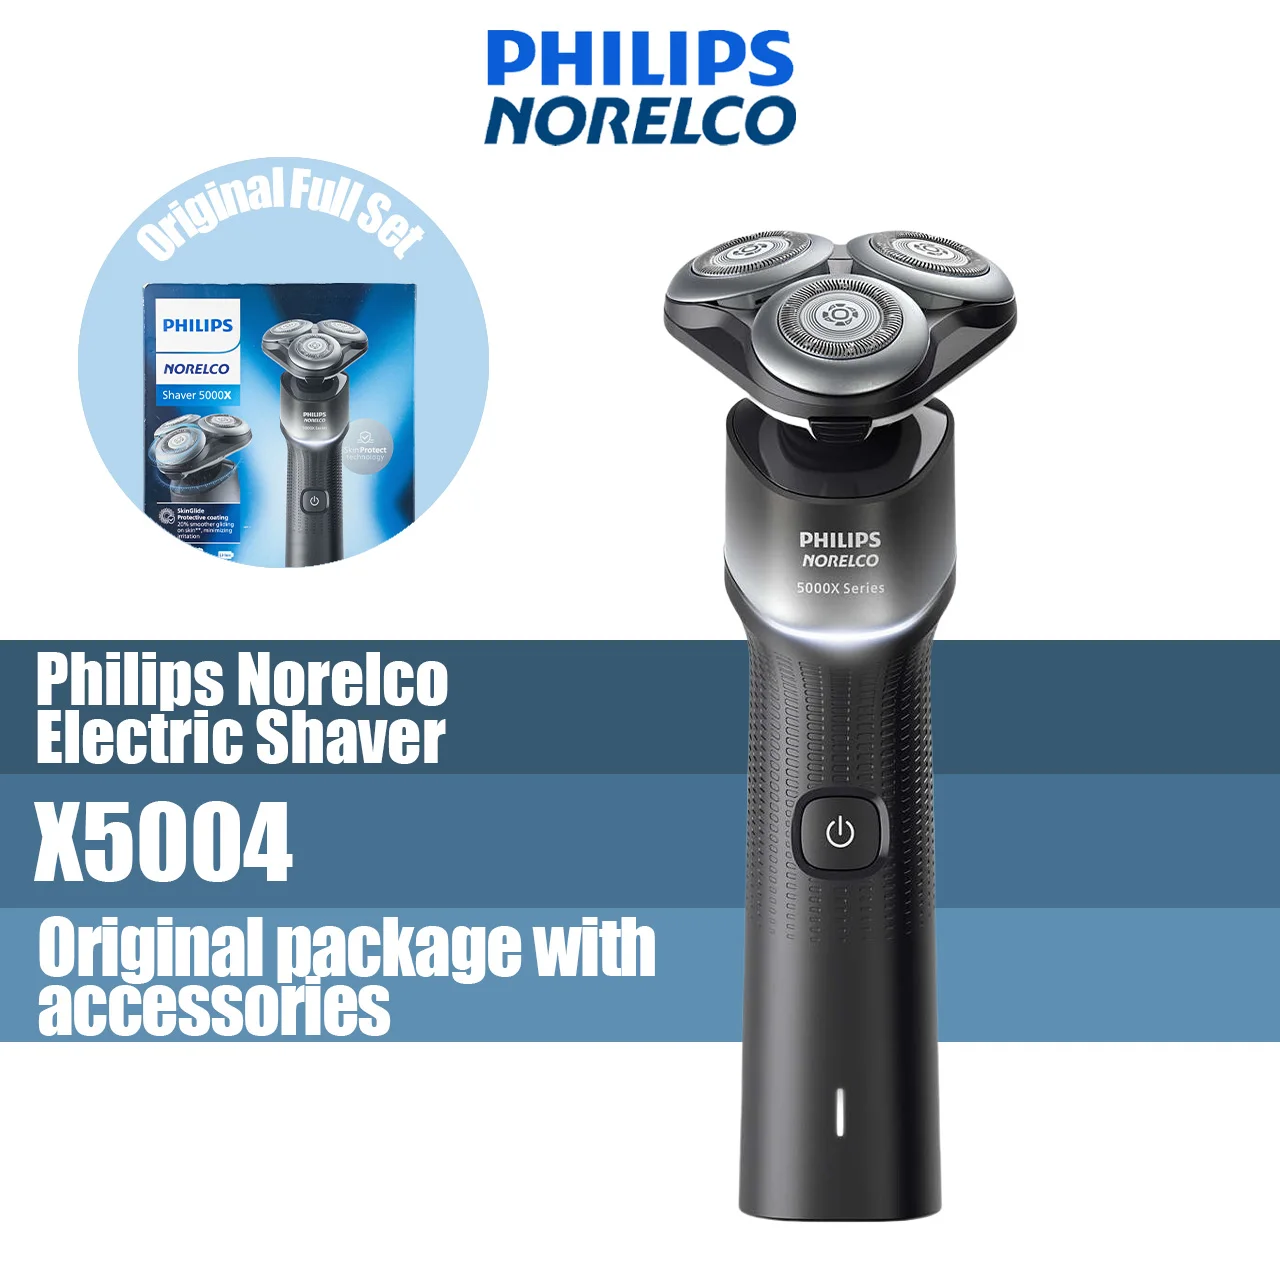 

Philips Norelco Electric Shaver series 5000 with accessories, Wet & dry, electric rotation shaver for men, X5004 Black